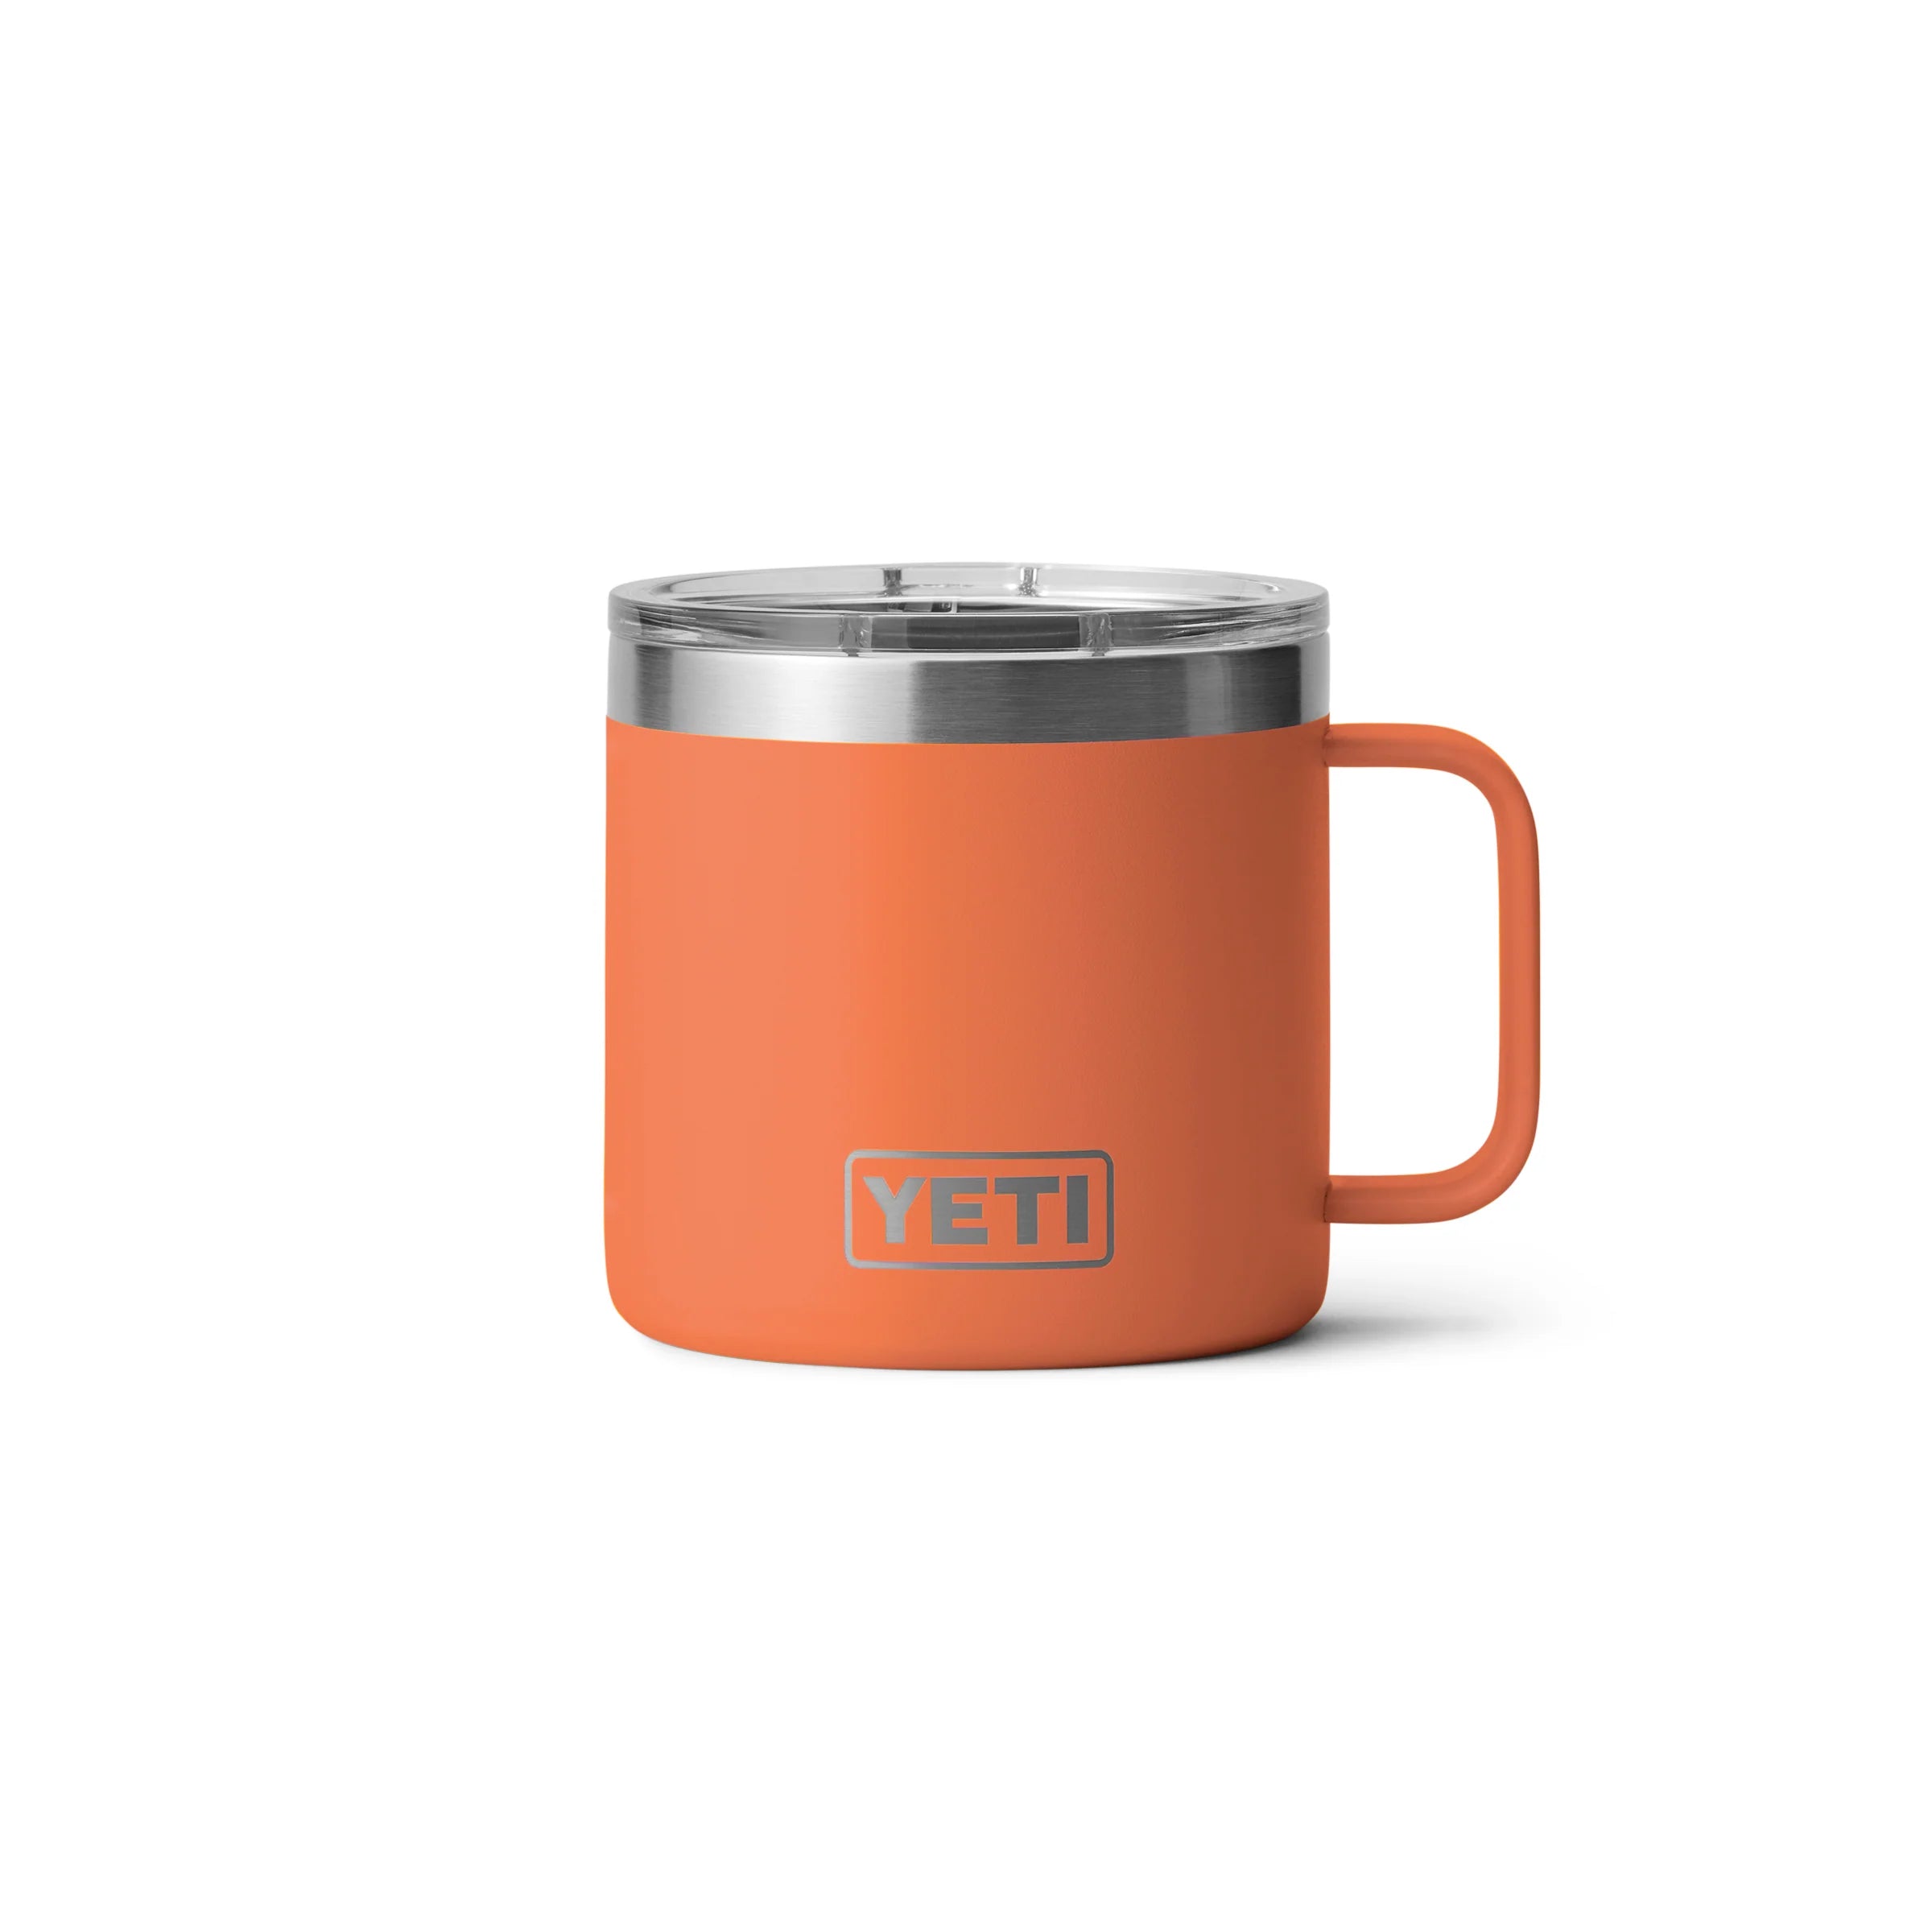 A YETI Rambler 14 oz Coffee Mug with a magliser™ lid. In limited edition color: High Desert Clay.